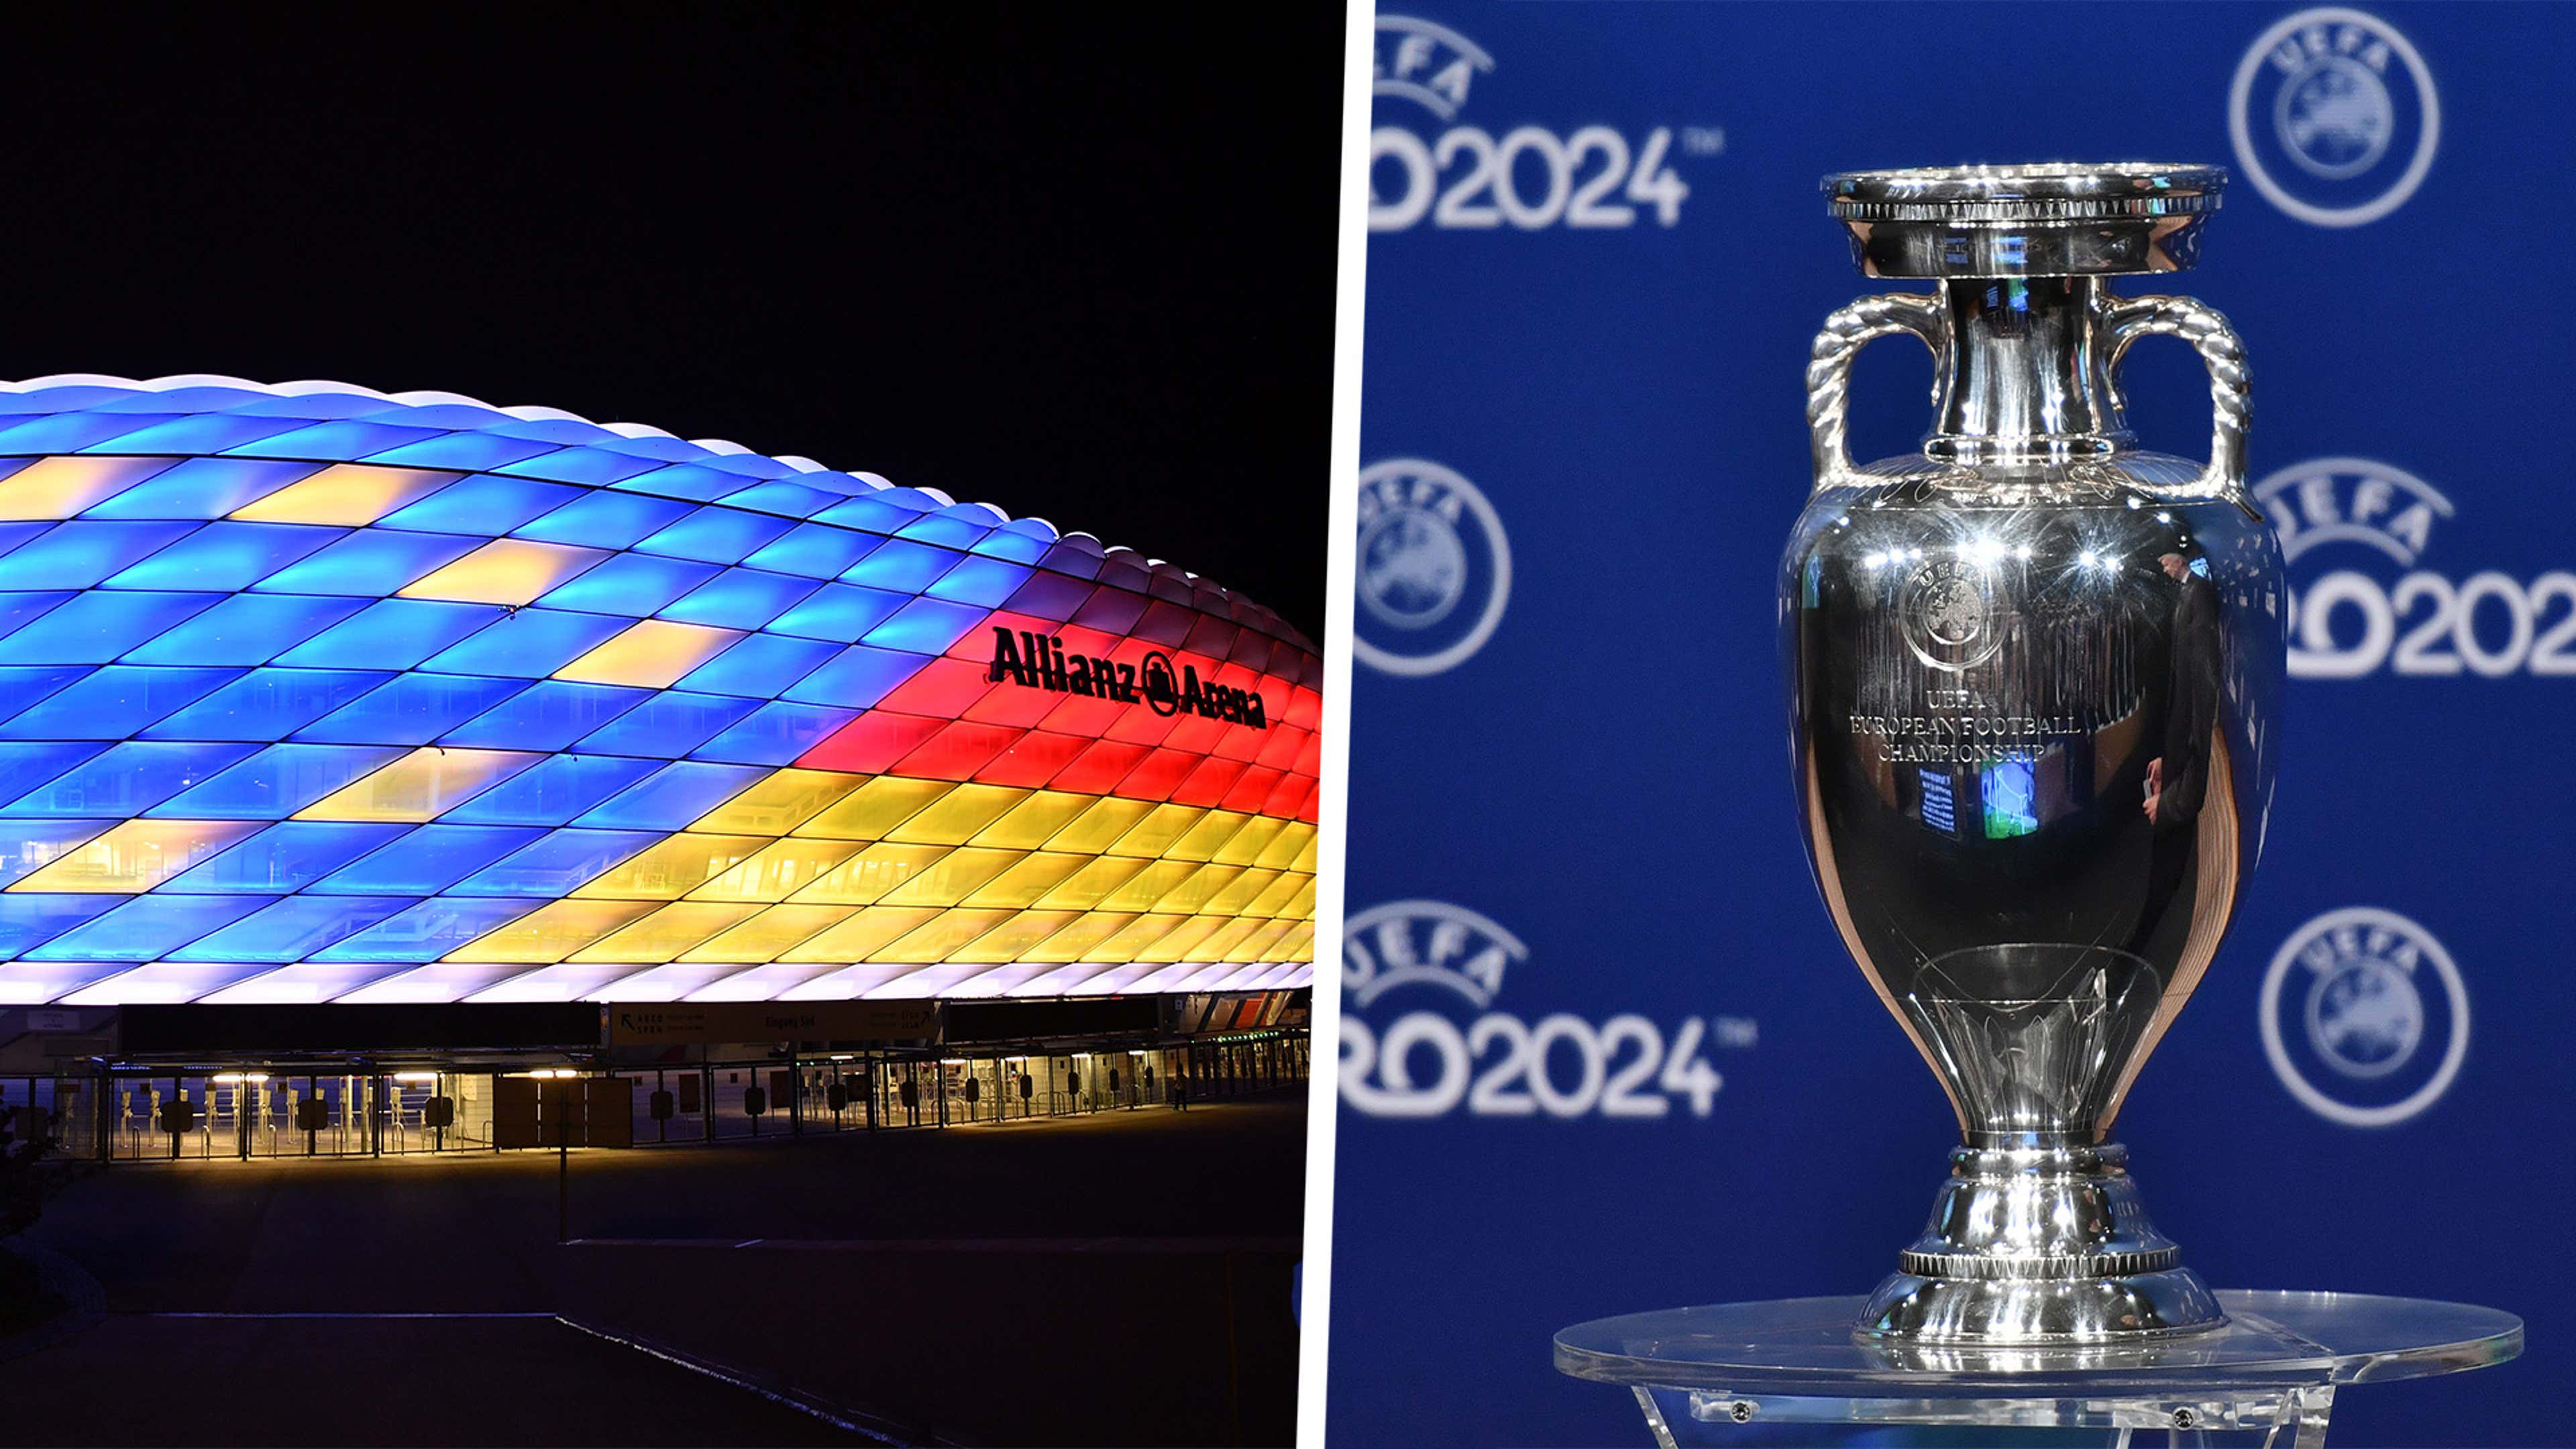 Euro 2024 Qualification, host cities, teams and format for Germany